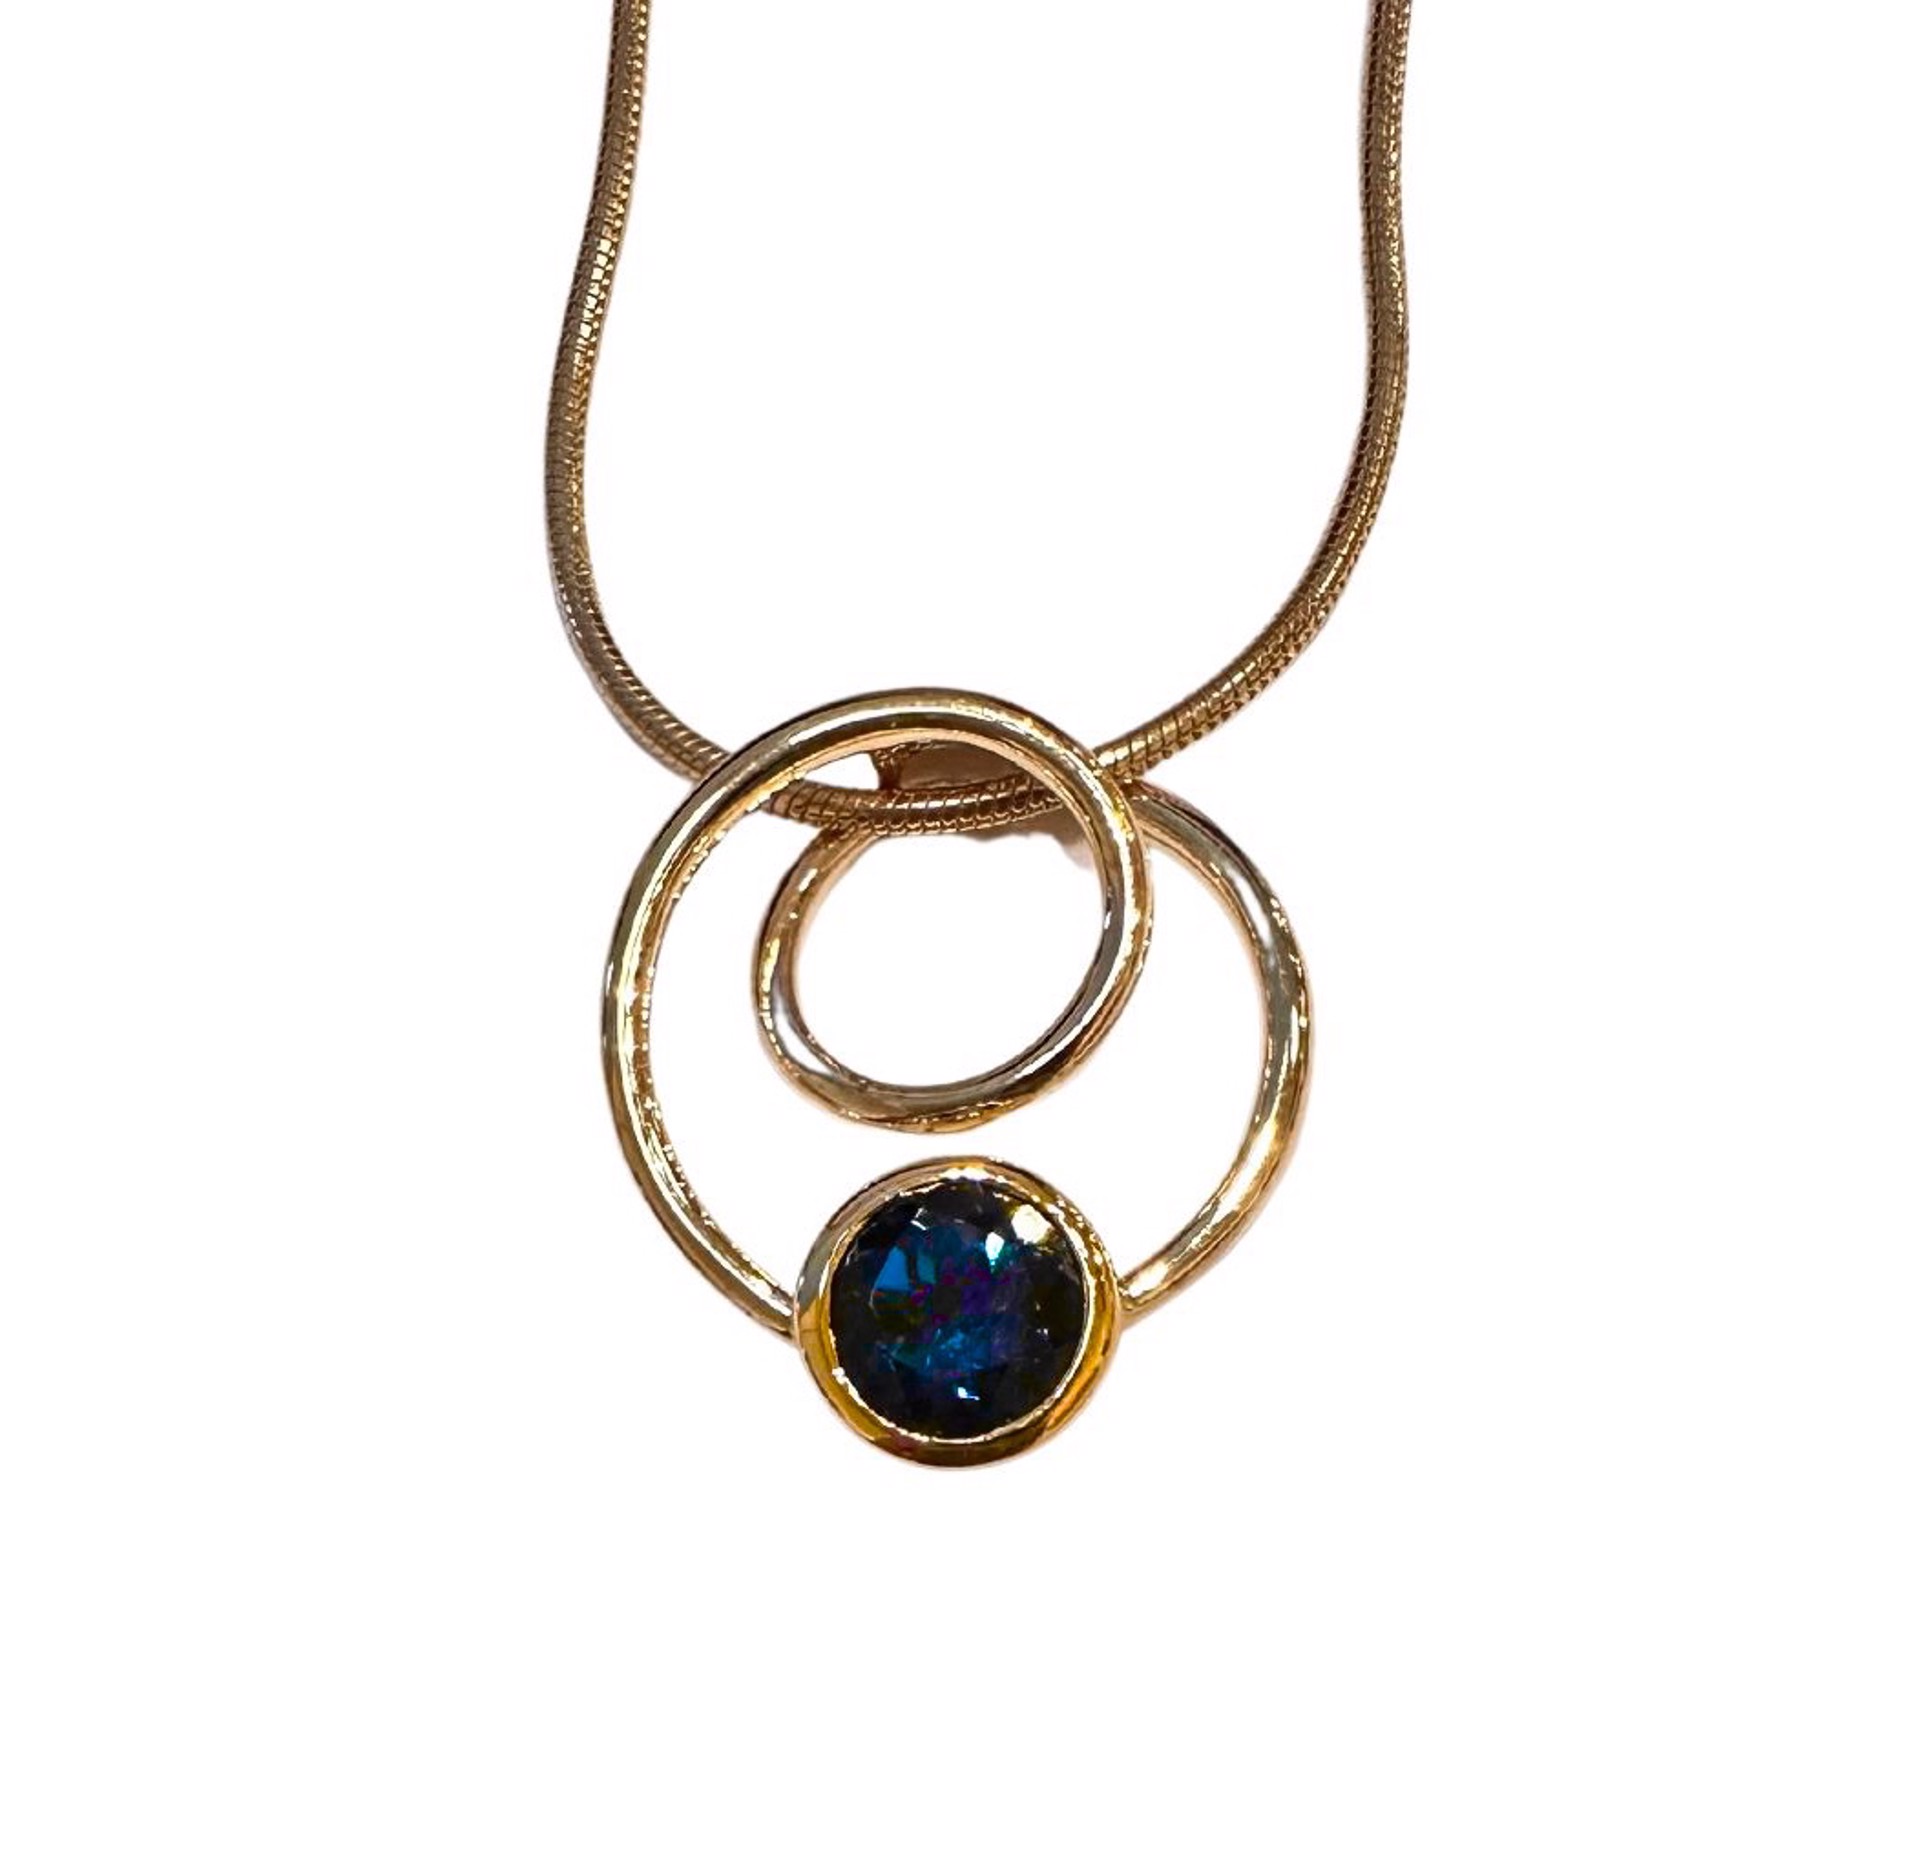 Pendant - Circle Swirl with London Blue Topaz and 14kt Goldfilled by Joryel Vera